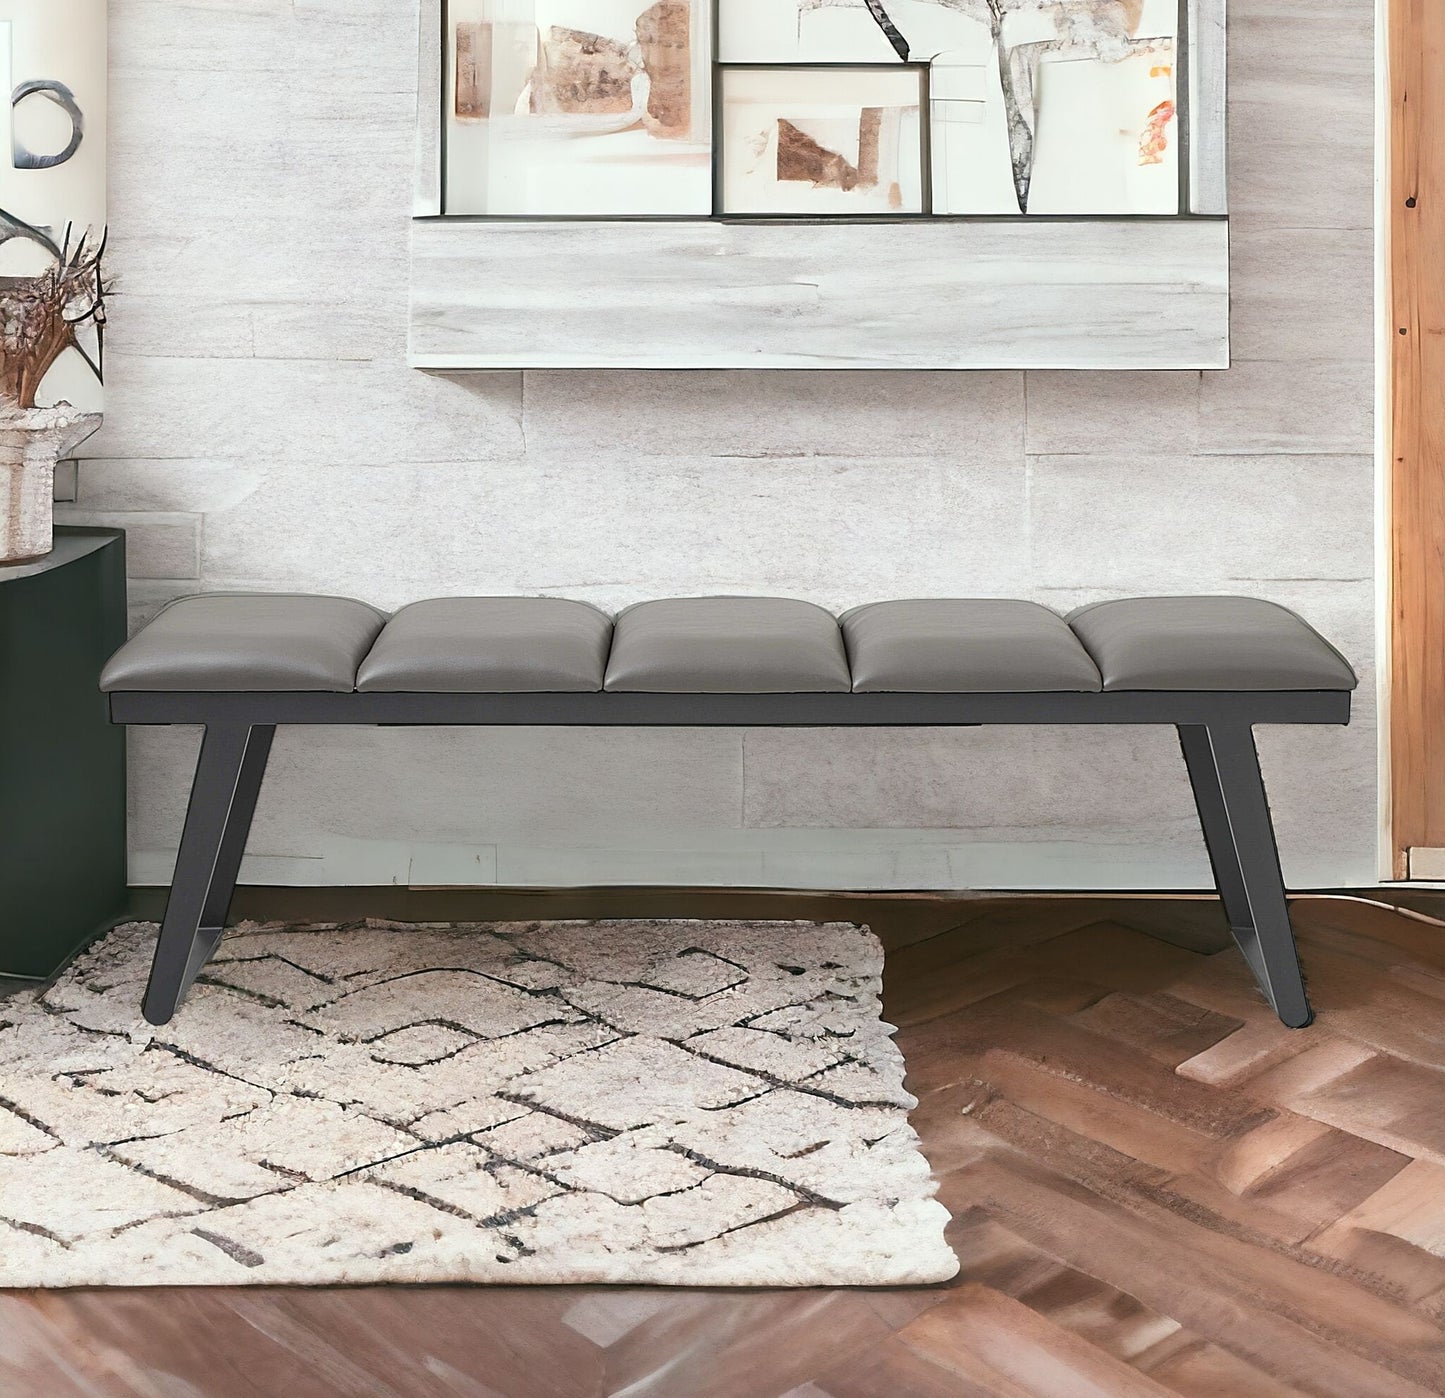 57" Gray Upholstered Faux Leather Bench